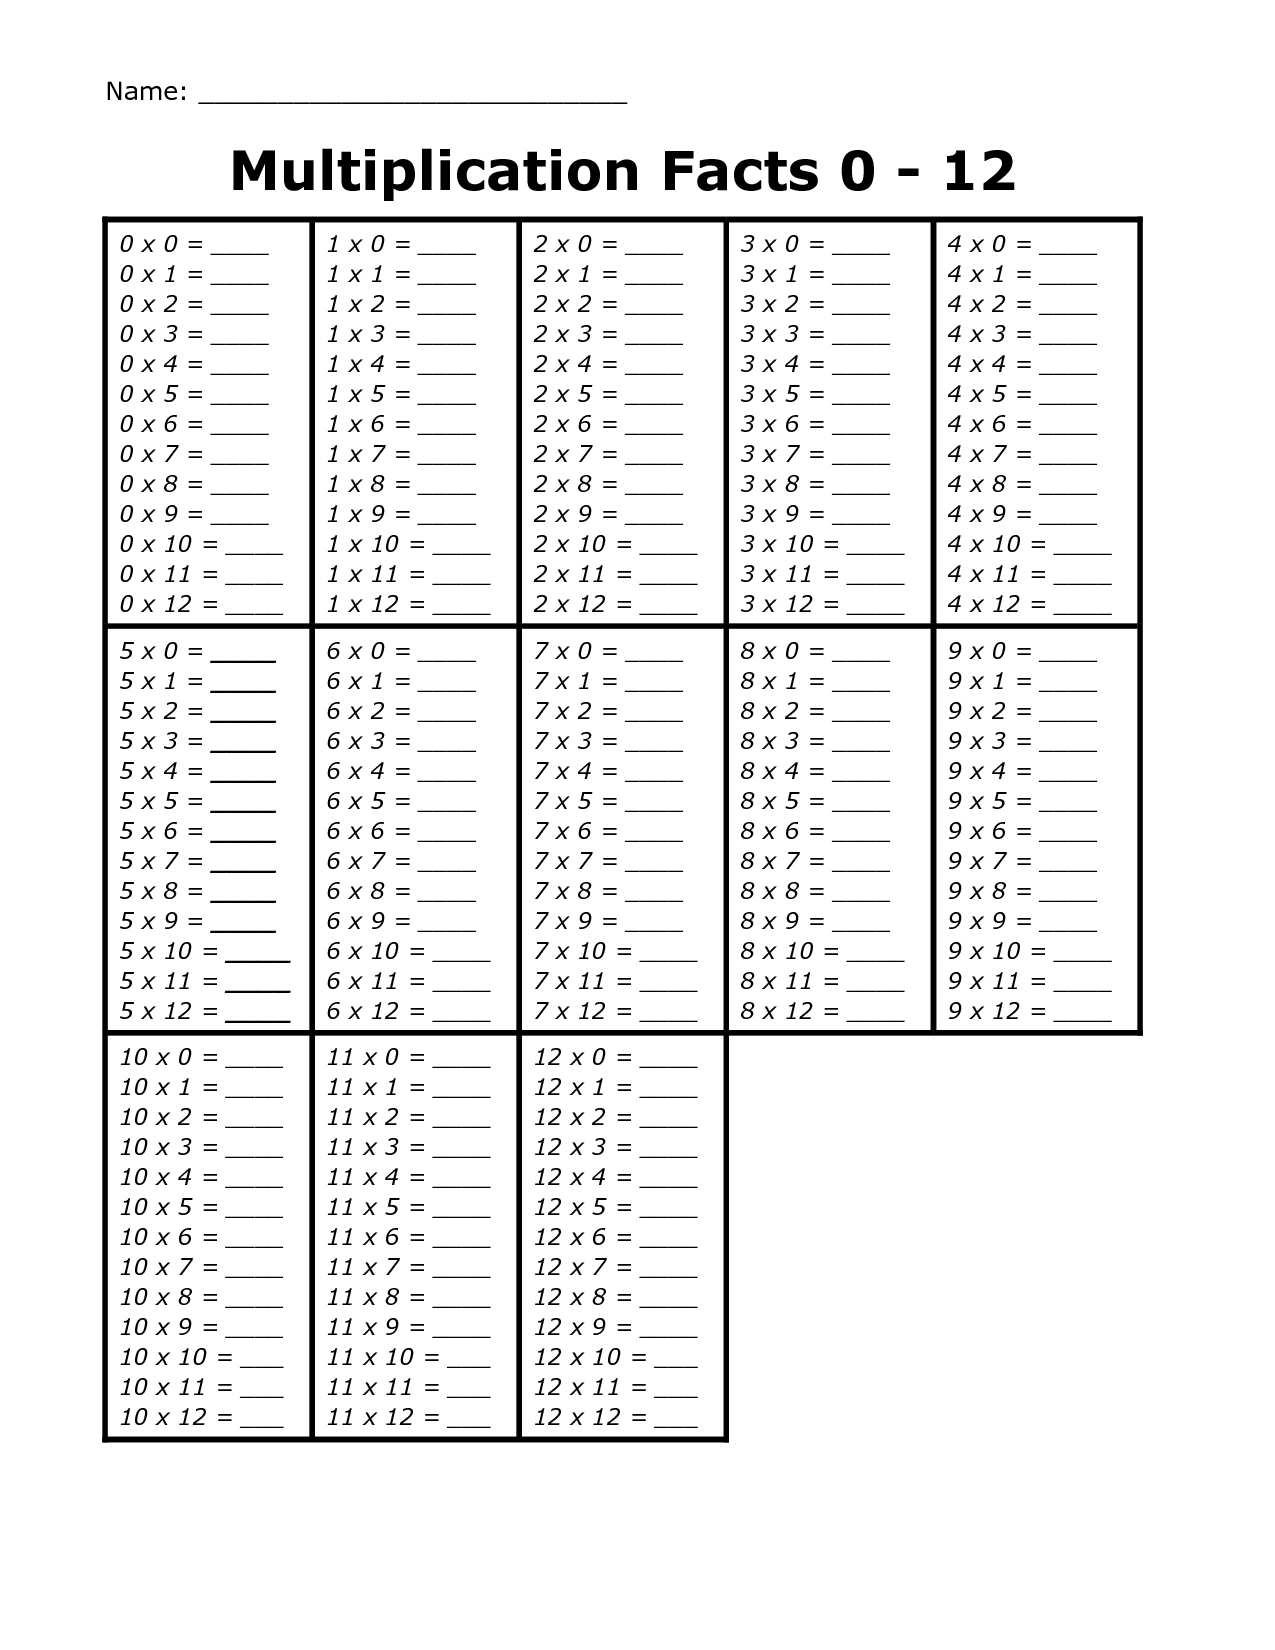 Printable Blank Multiplication Table 0-12 intended for Printable 12X12 Multiplication Grid